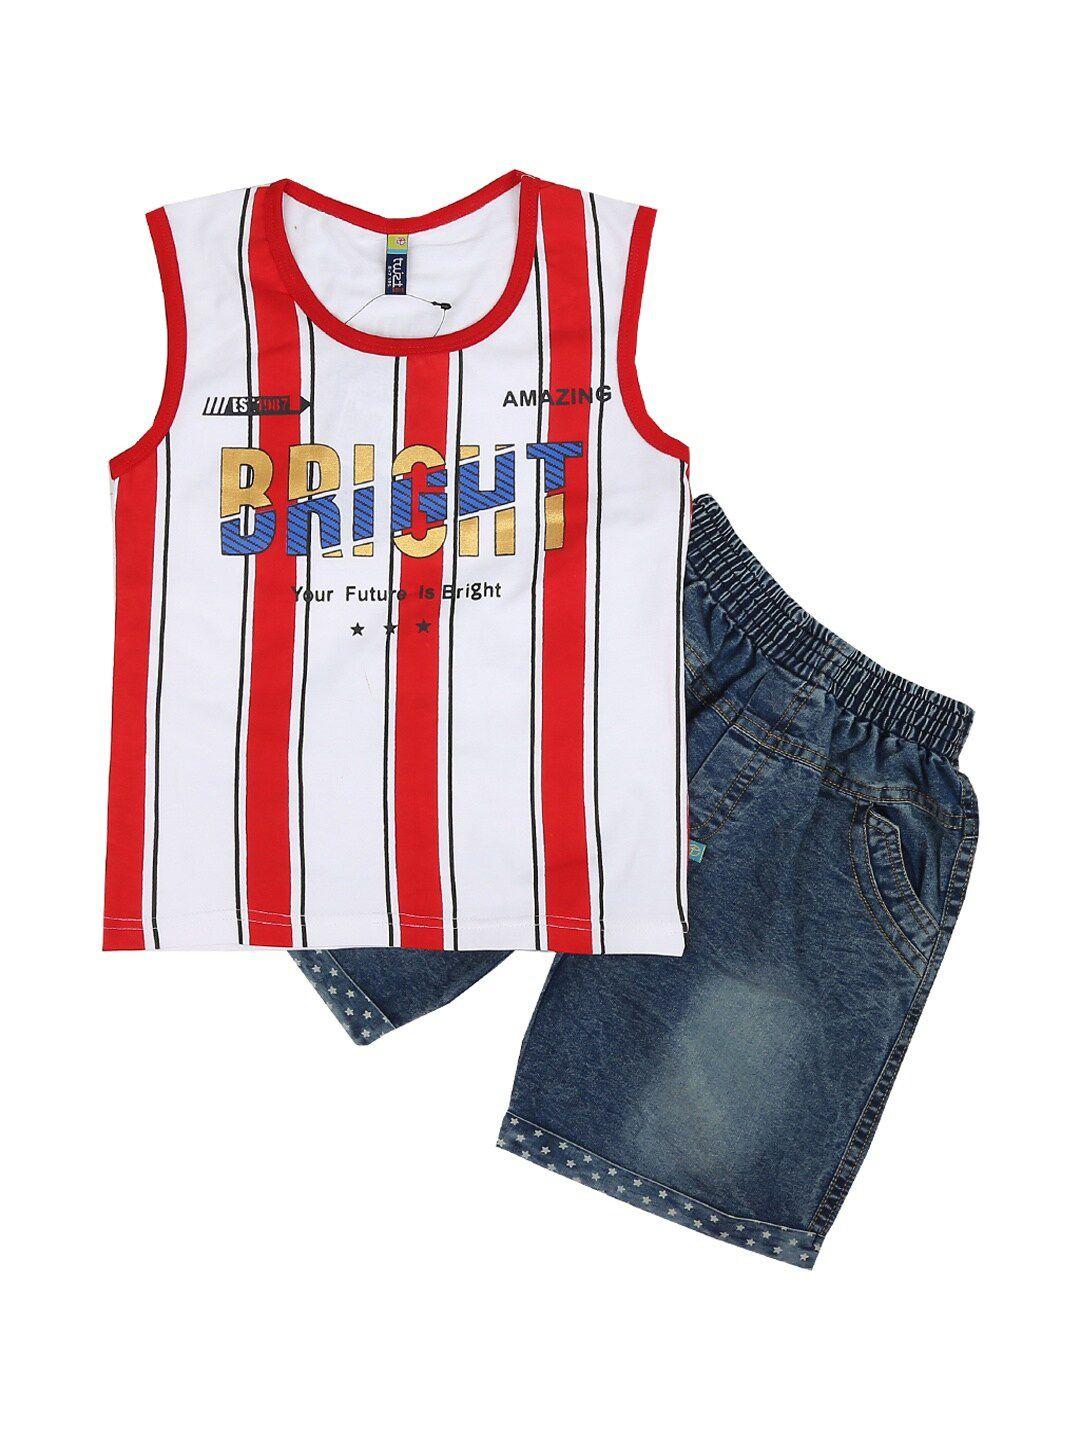 v-mart kids white & red striped t-shirt with shorts